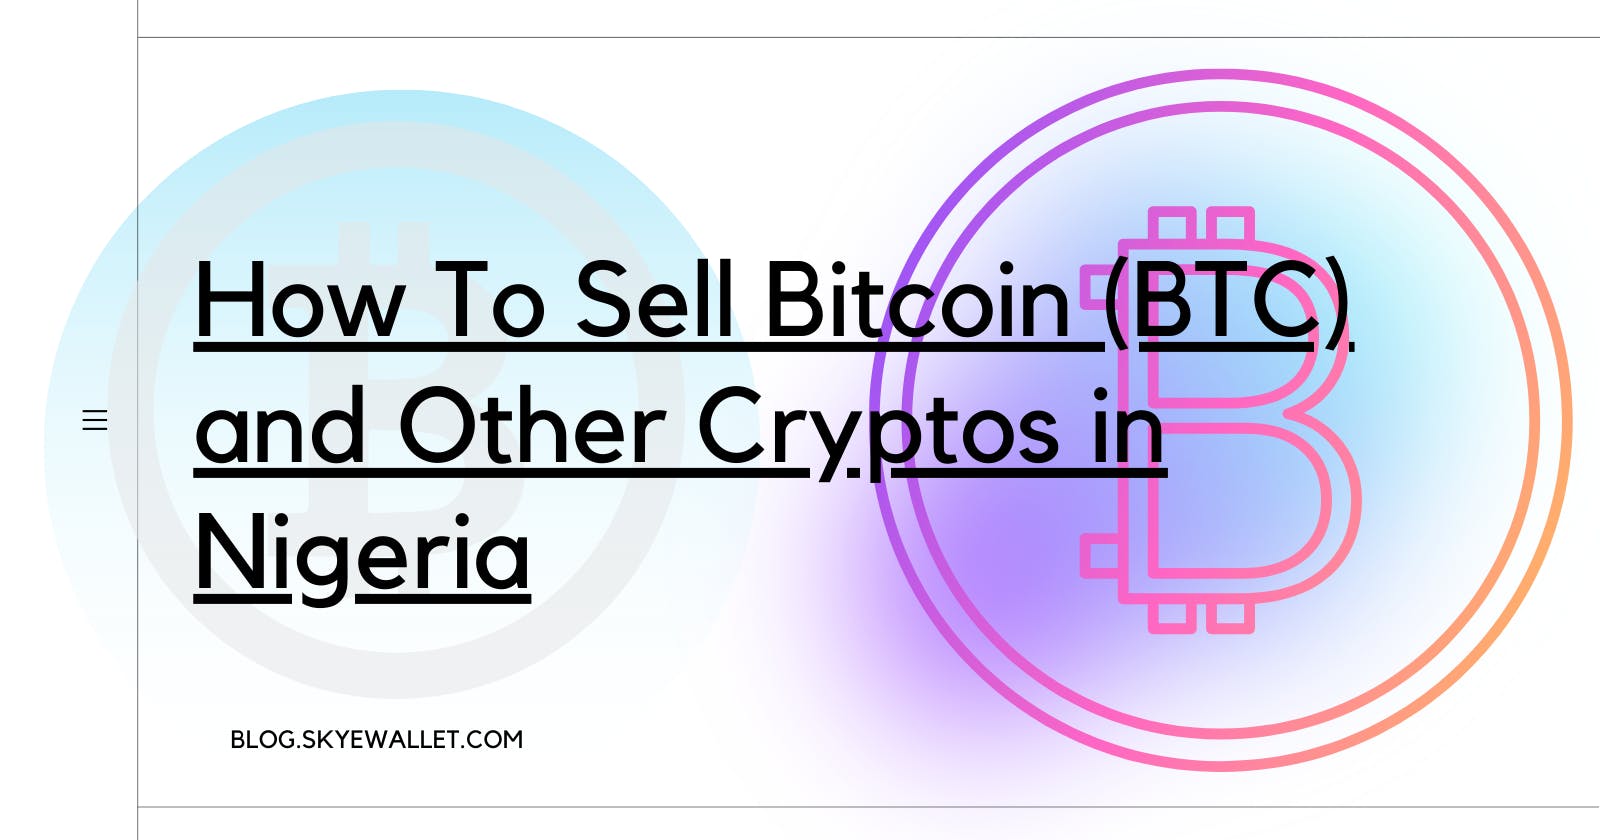 How To Sell Bitcoin (BTC) and Other Cryptos in Nigeria